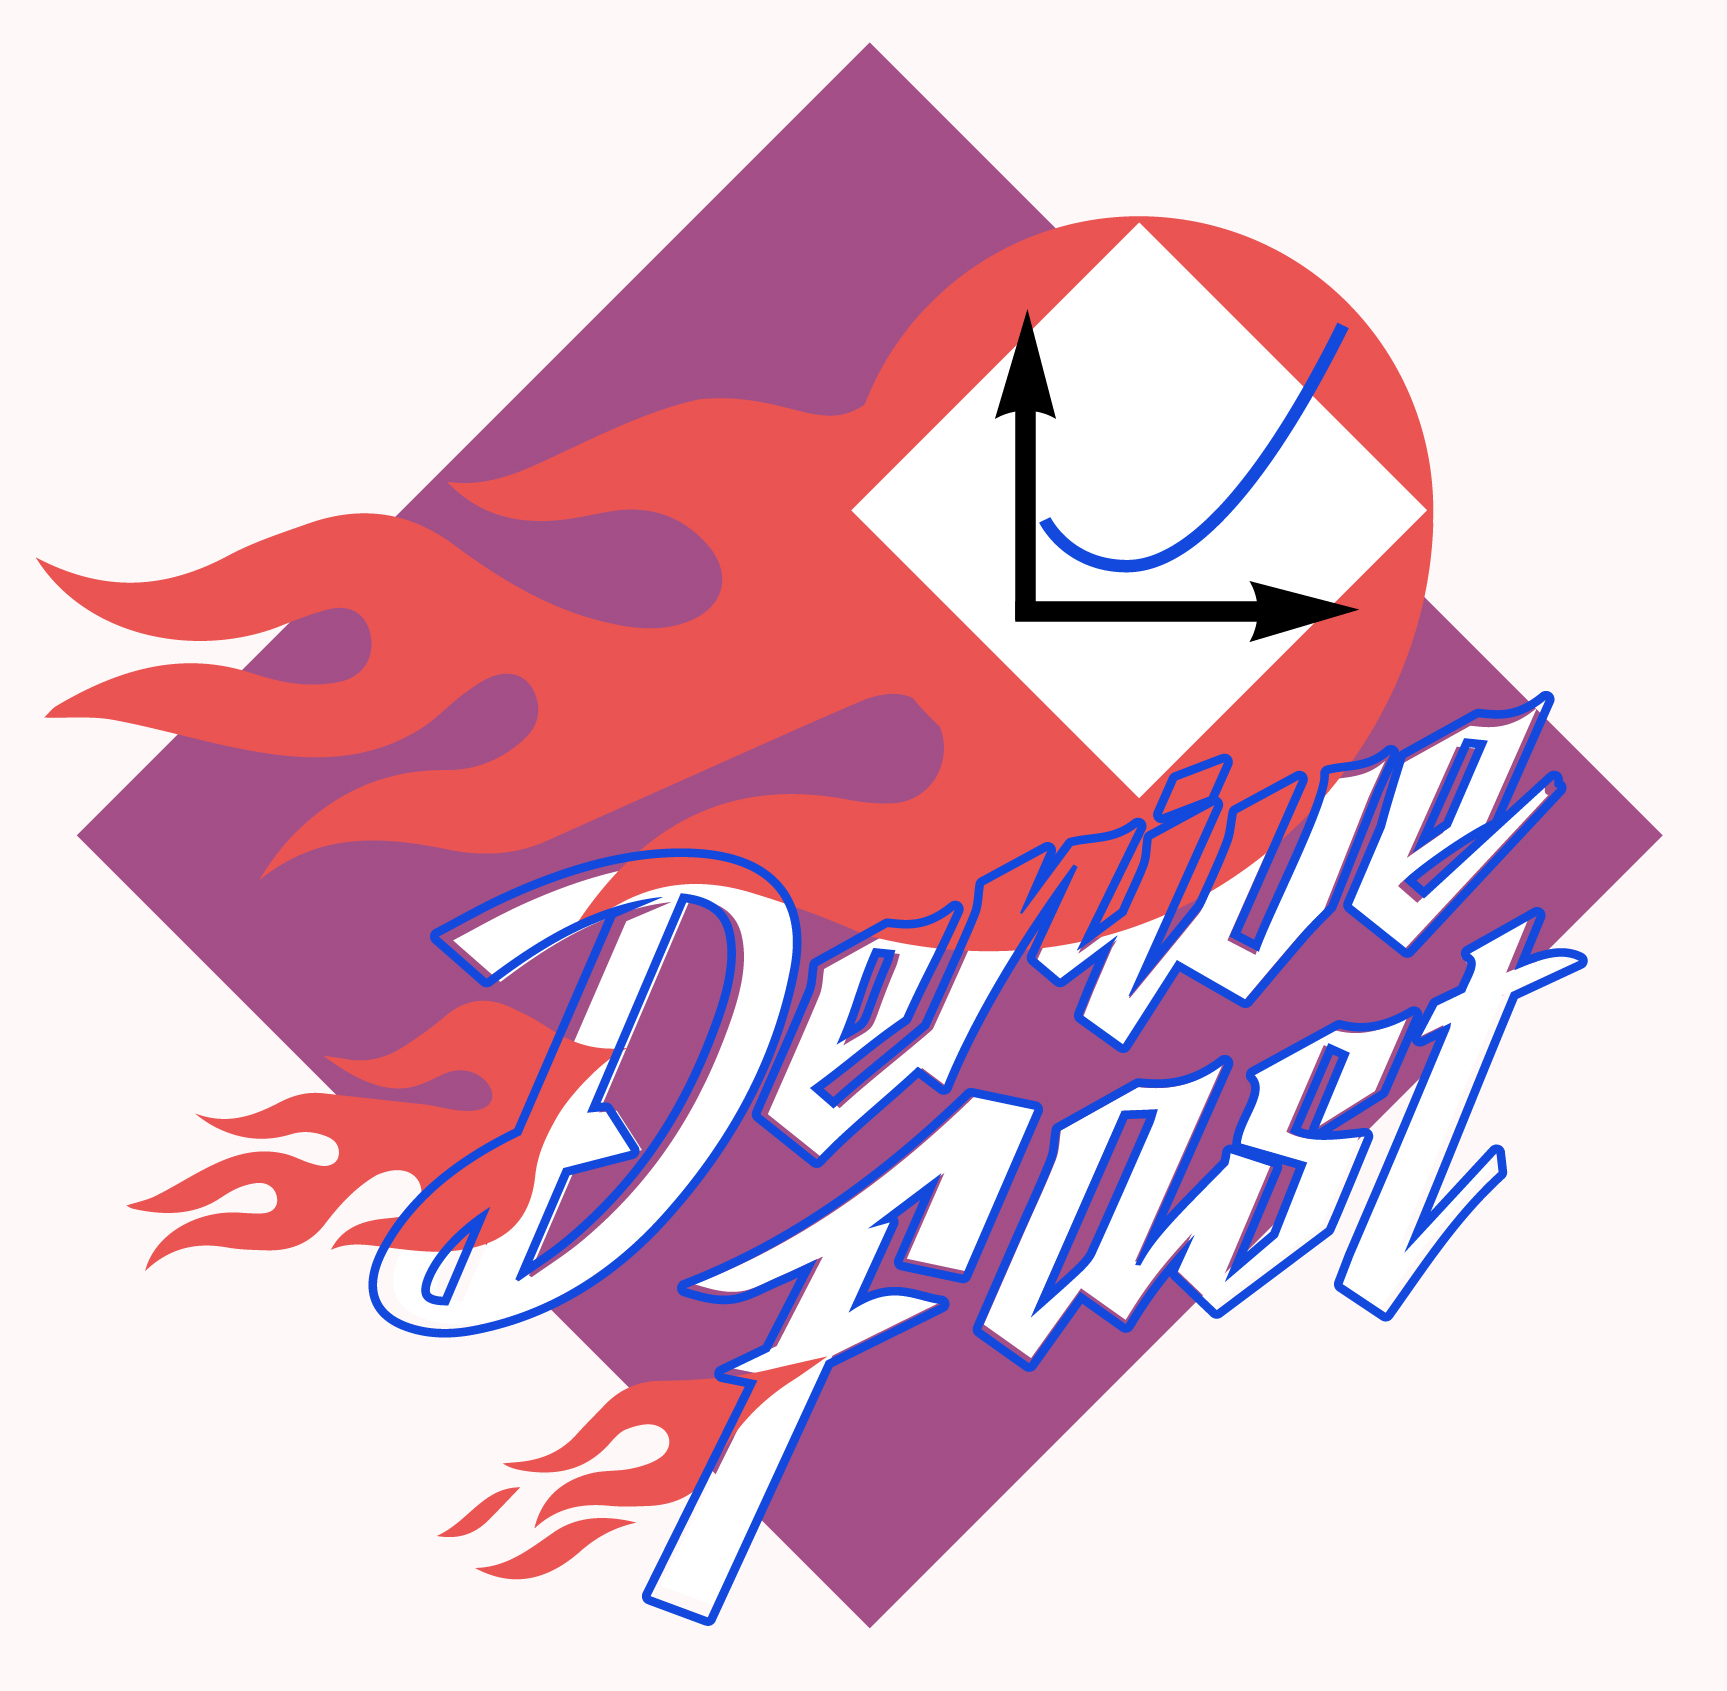 Derive Fast: illustration of a physics-themed biker gang patch